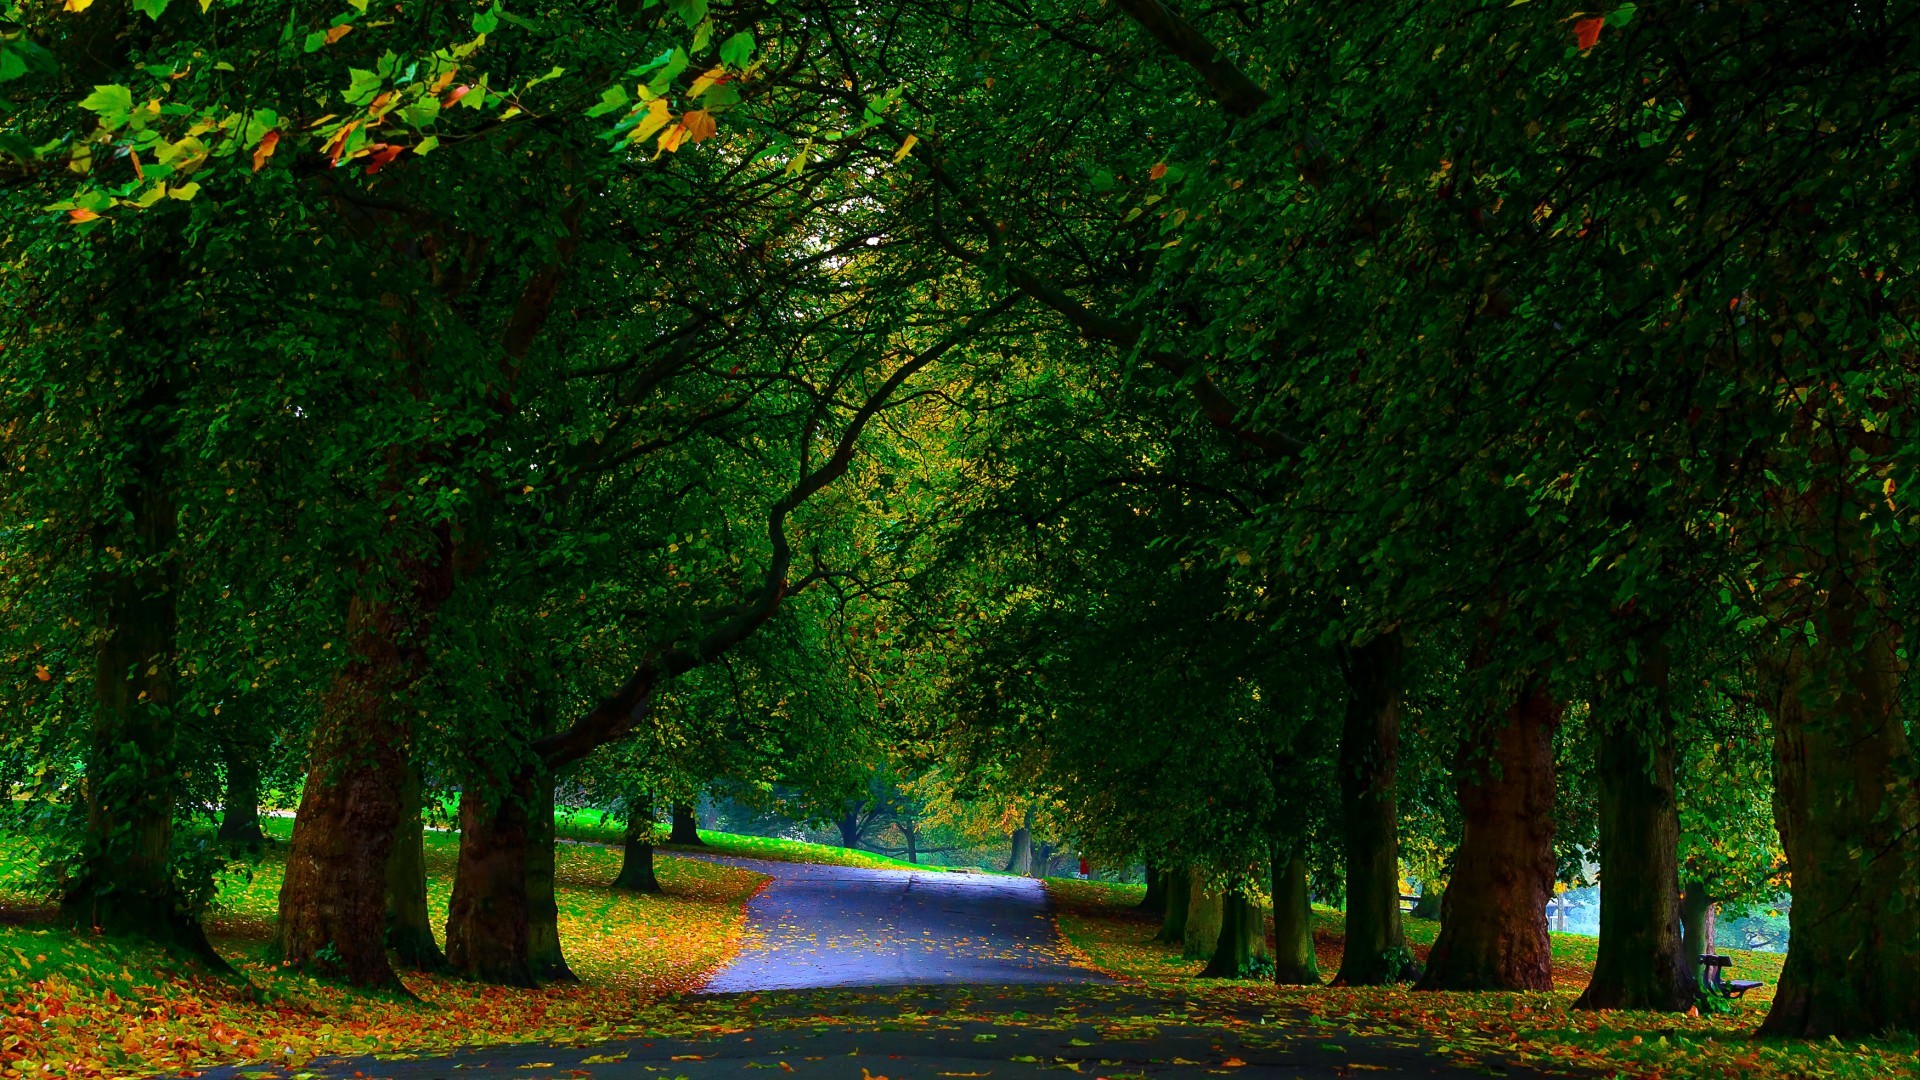 General 1920x1080 nature trees forest branch leaves wood park path fall bench field grass